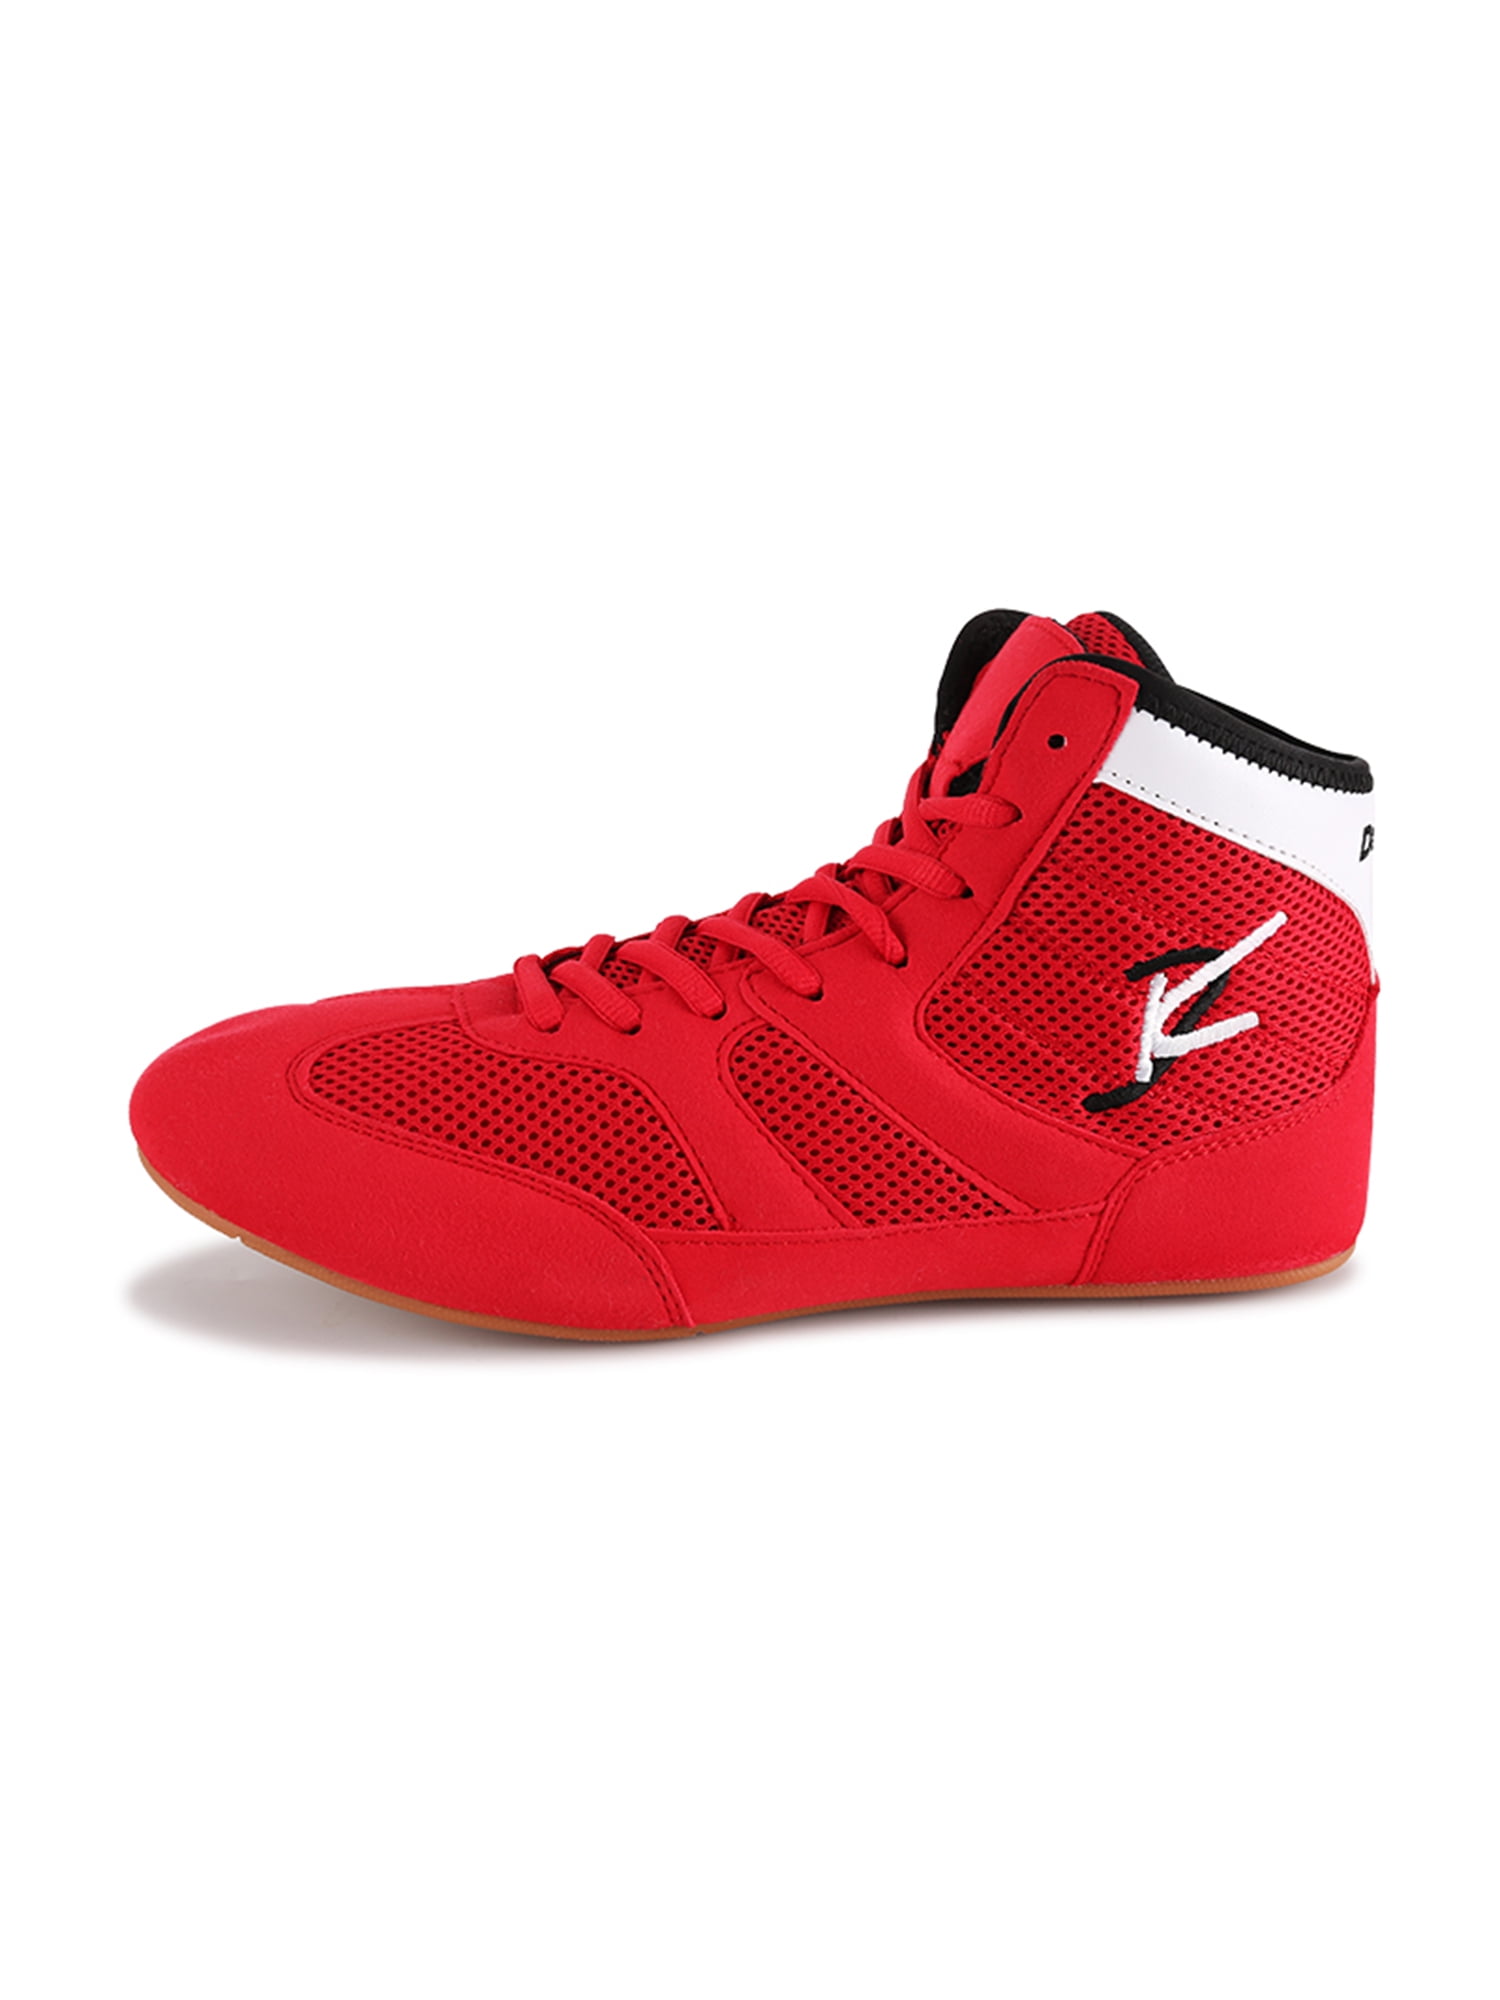 GENILU & Adult Breathable Lightweight High Top Boxing Comfort Training Lace Up Boots Red 7.5 Walmart.com